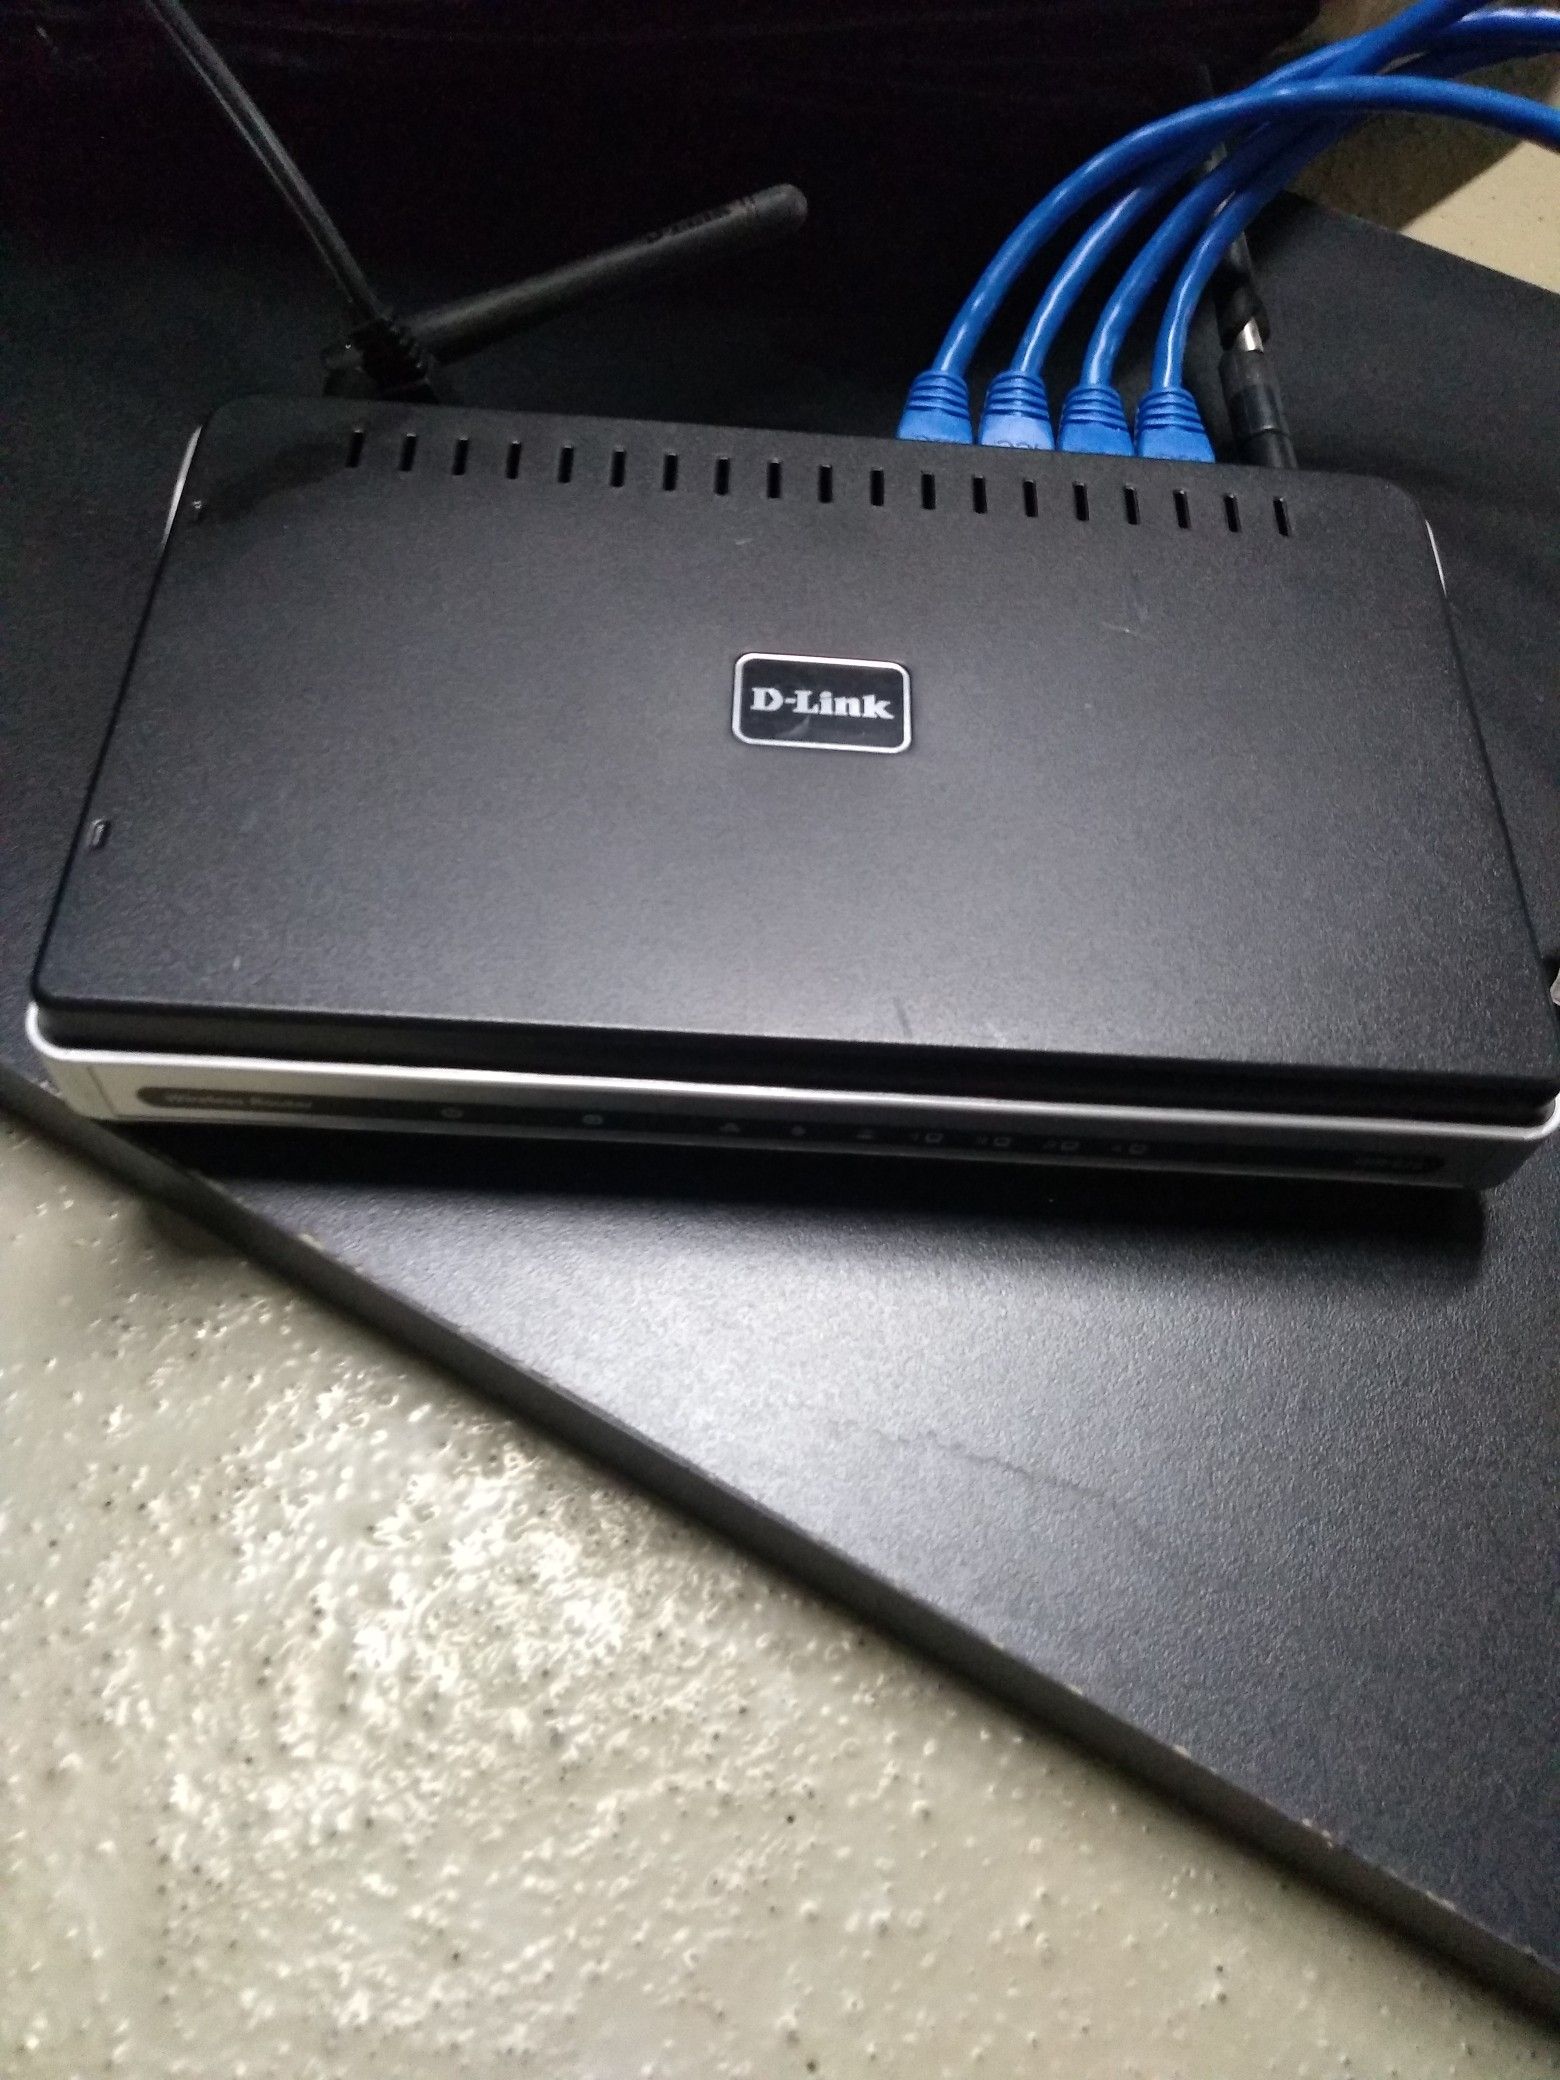 D link wireless router